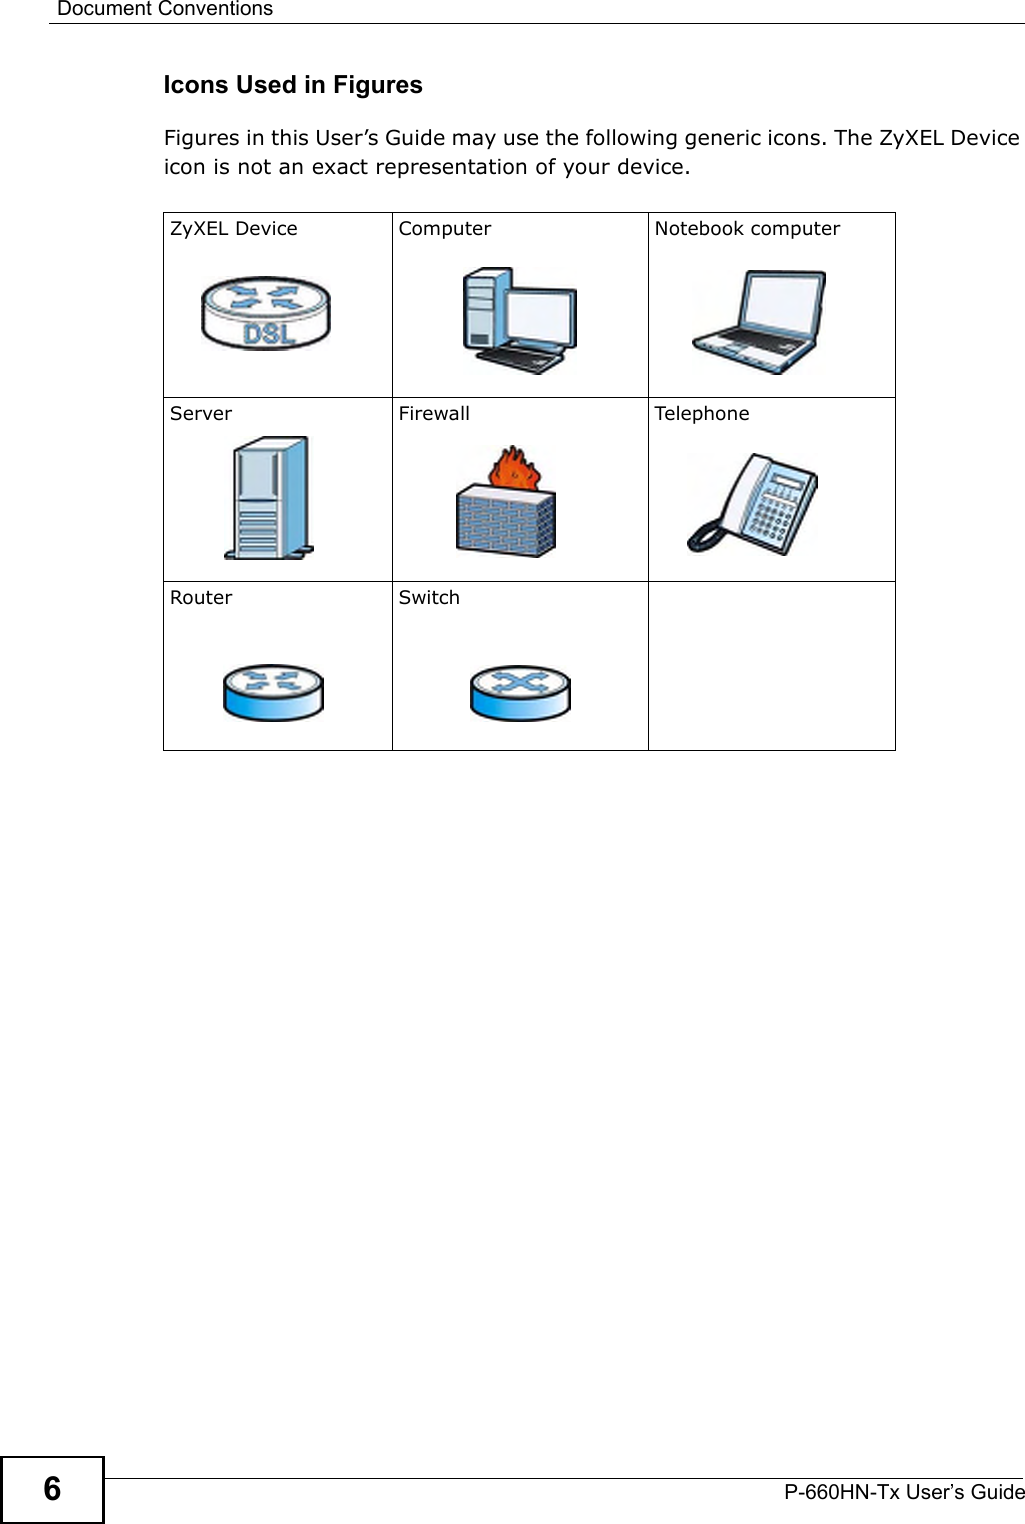 Document ConventionsP-660HN-Tx User’s Guide6Icons Used in FiguresFigures in this User’s Guide may use the following generic icons. The ZyXEL Device icon is not an exact representation of your device.ZyXEL Device Computer Notebook computerServer Firewall Telep honeRouter Switch